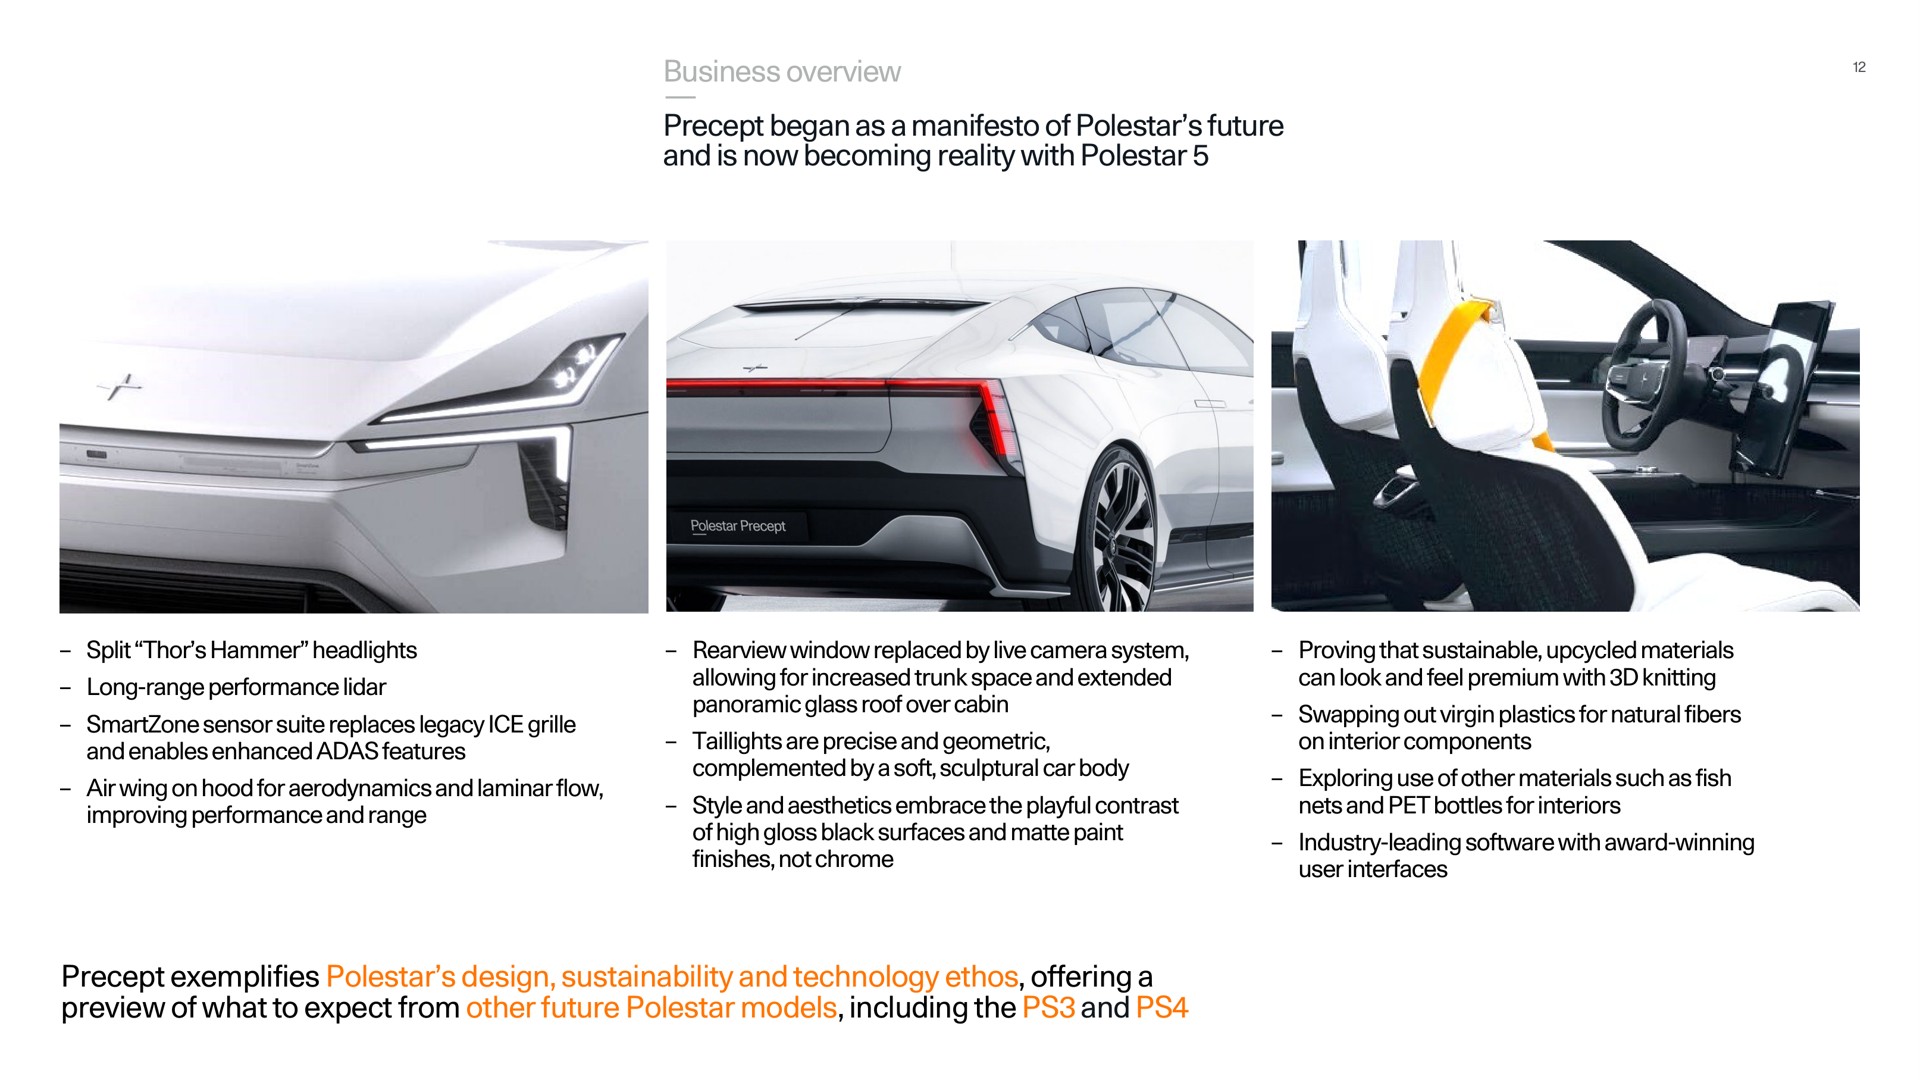 business overview precept began as a manifesto of polestar future and is now becoming reality with polestar precept exemplifies polestar design and technology ethos offering a preview of what to expect from other future polestar models including the and sensor suite replaces legacy ice grille on hood for aerodynamics laminar flow gloss surfaces matte paint swapping out virgin plastics for natural fibers exploring use materials such fish industry leading award winning | Polestar